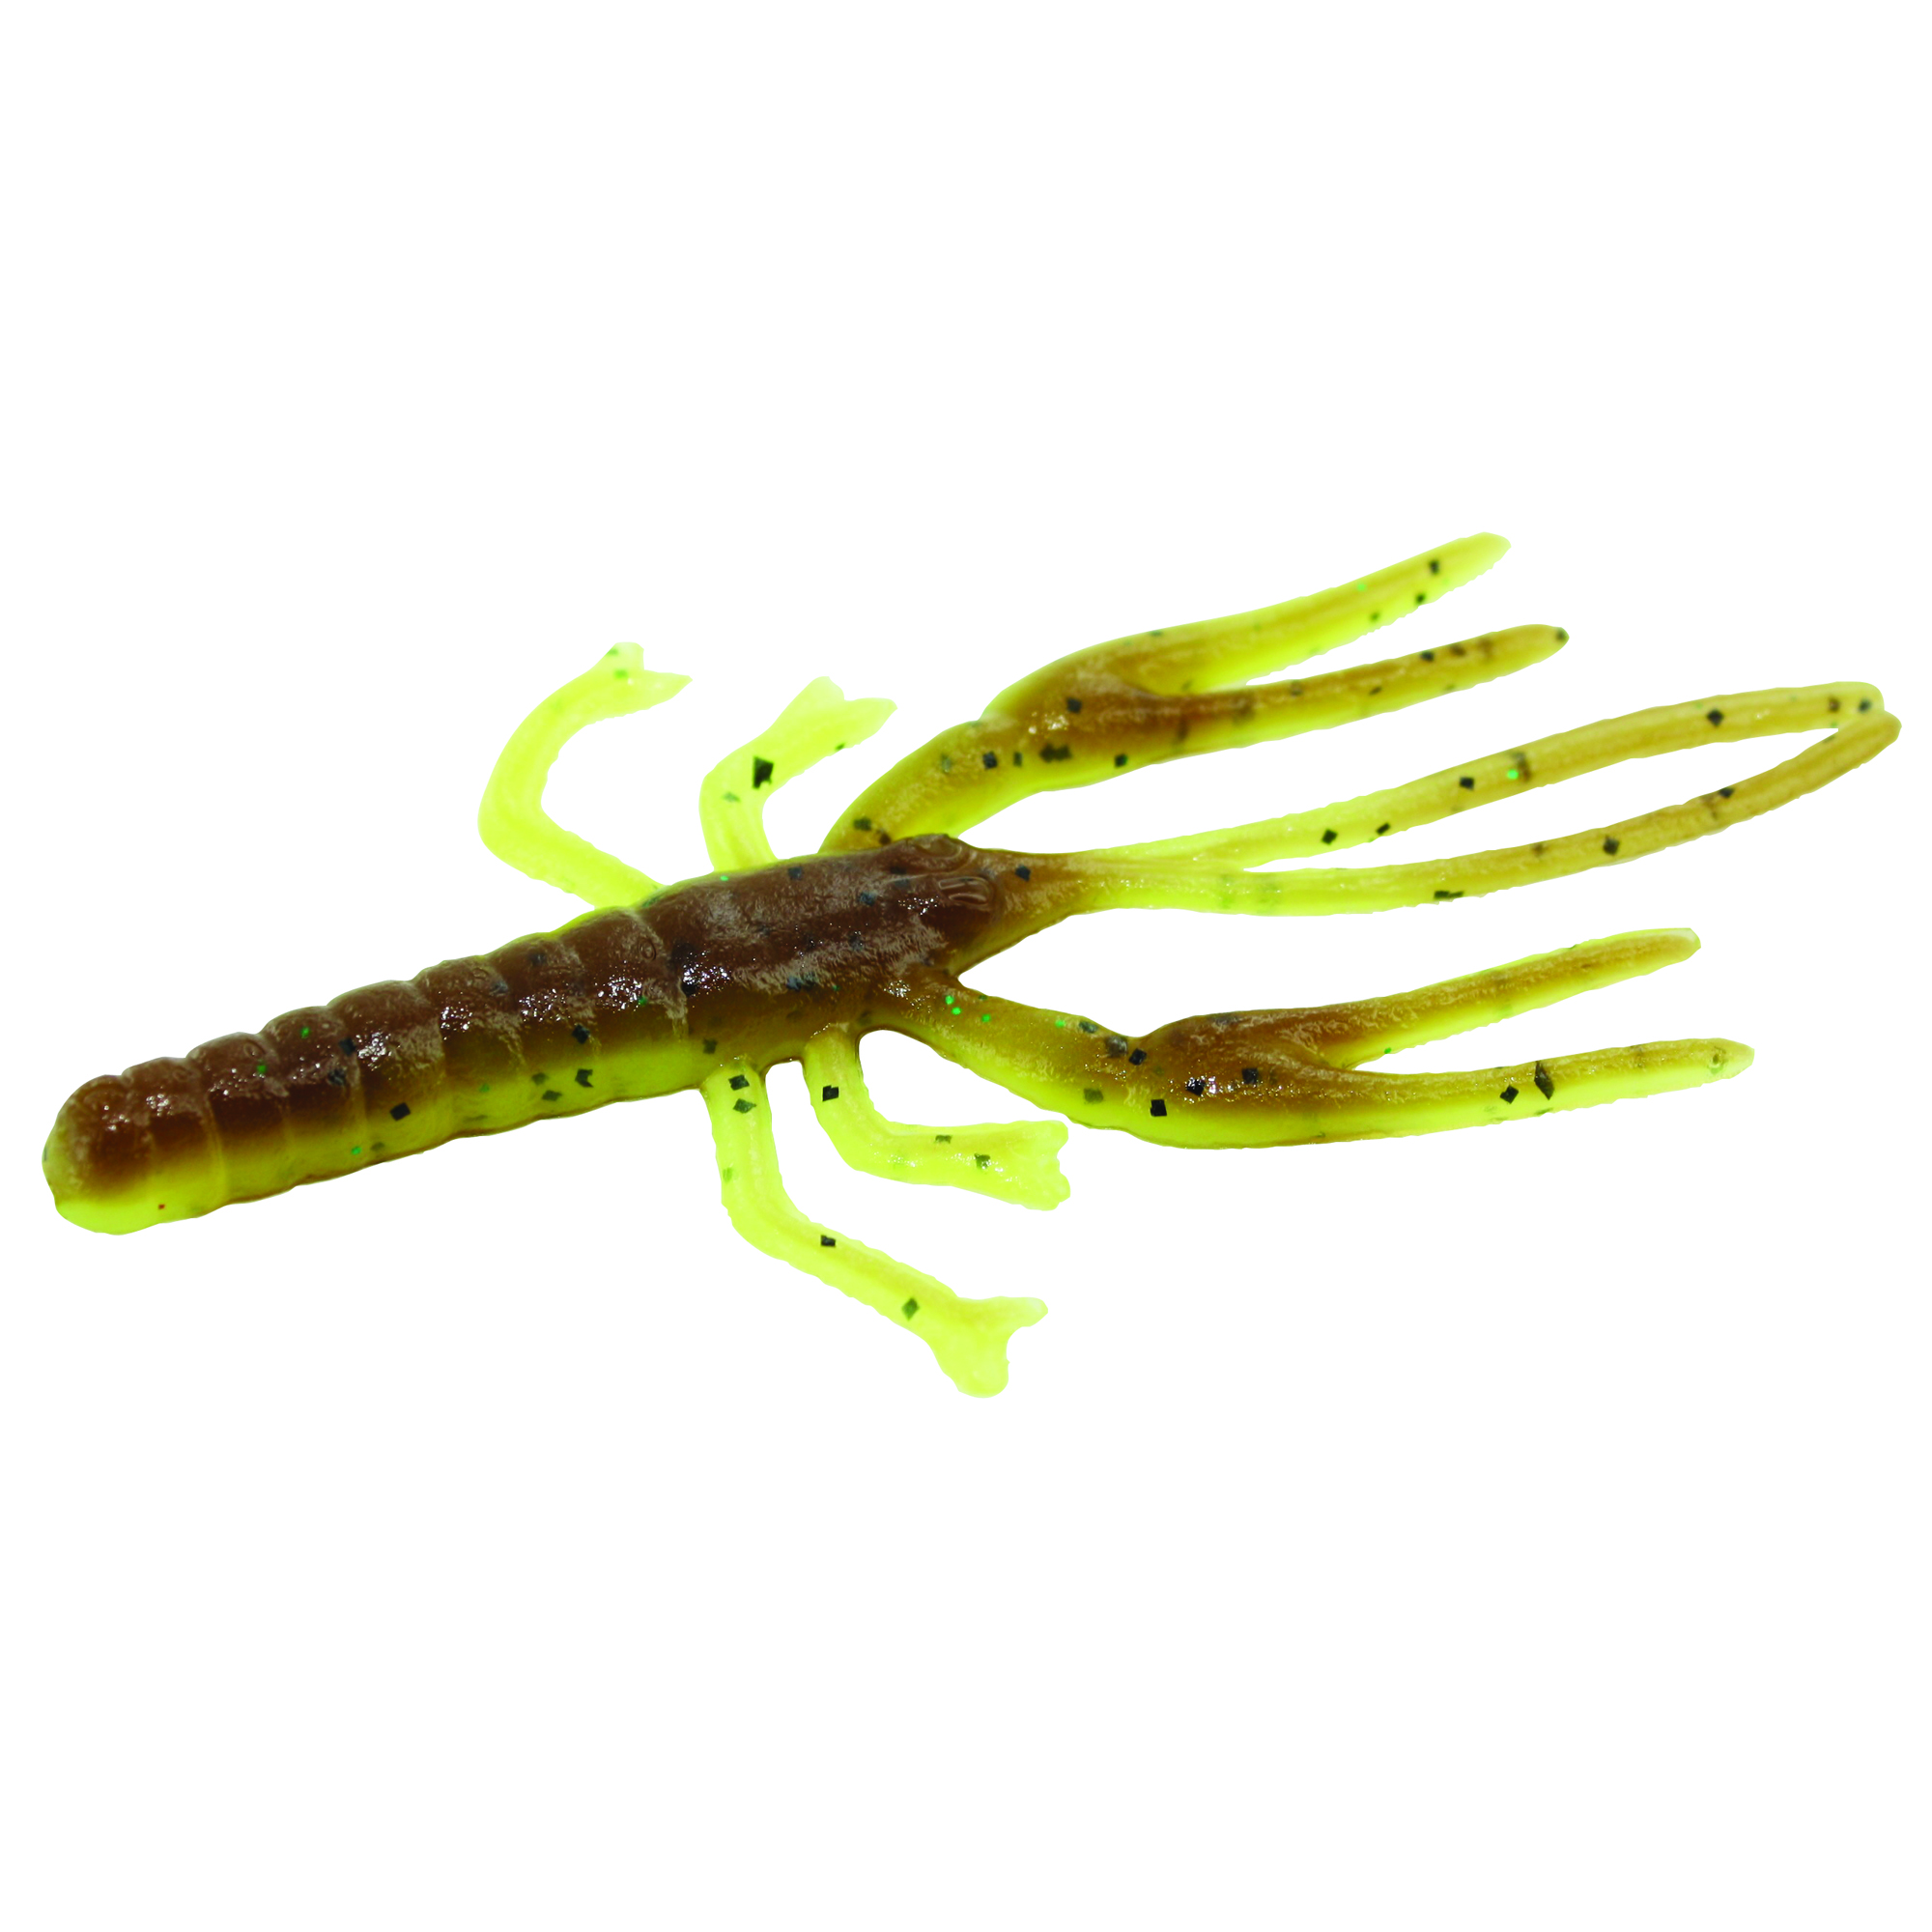 Zoom Bait Lil' Critter Craw Bait-Pack of 12 (Black/Blue Claw, 3.12-Inch),  One Size